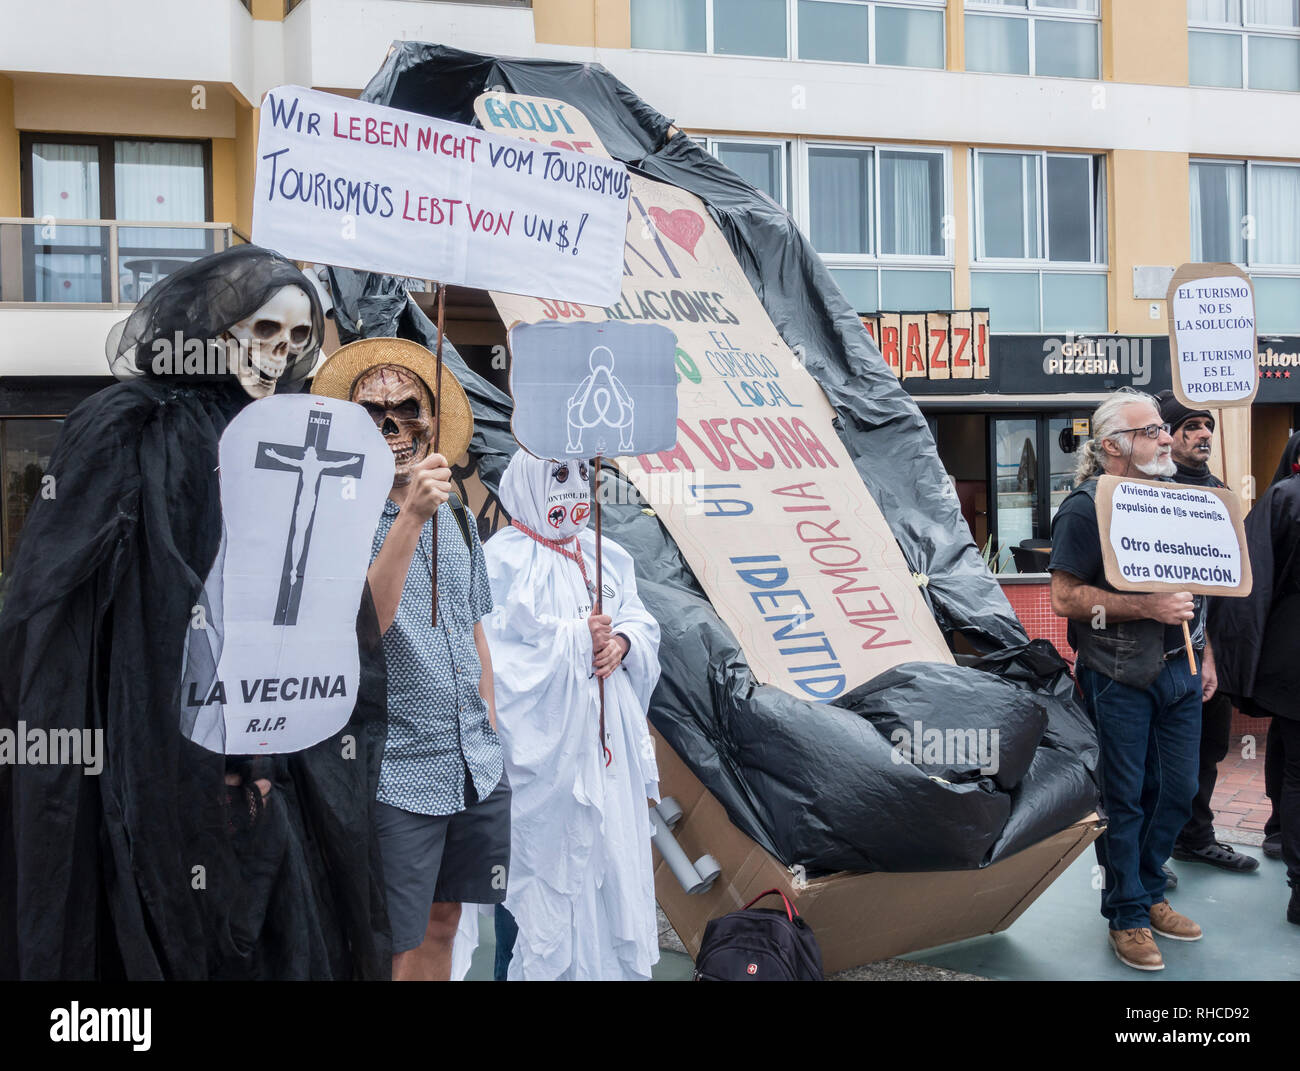 Las Palmas, Gran Canaria, Canary Islands, Spain. 2nd Feb, 2019. Local people in the capital of Gran Canaria, Las Palmas, protest against the gentrification of local neighbourhoods in the city, which, they say, is leading to rising rental costs for local people. Holiday home rentals, Airbnb, the tourist industry., all major concers for the protesters. Credit: ALAN DAWSON/Alamy Live News Stock Photo